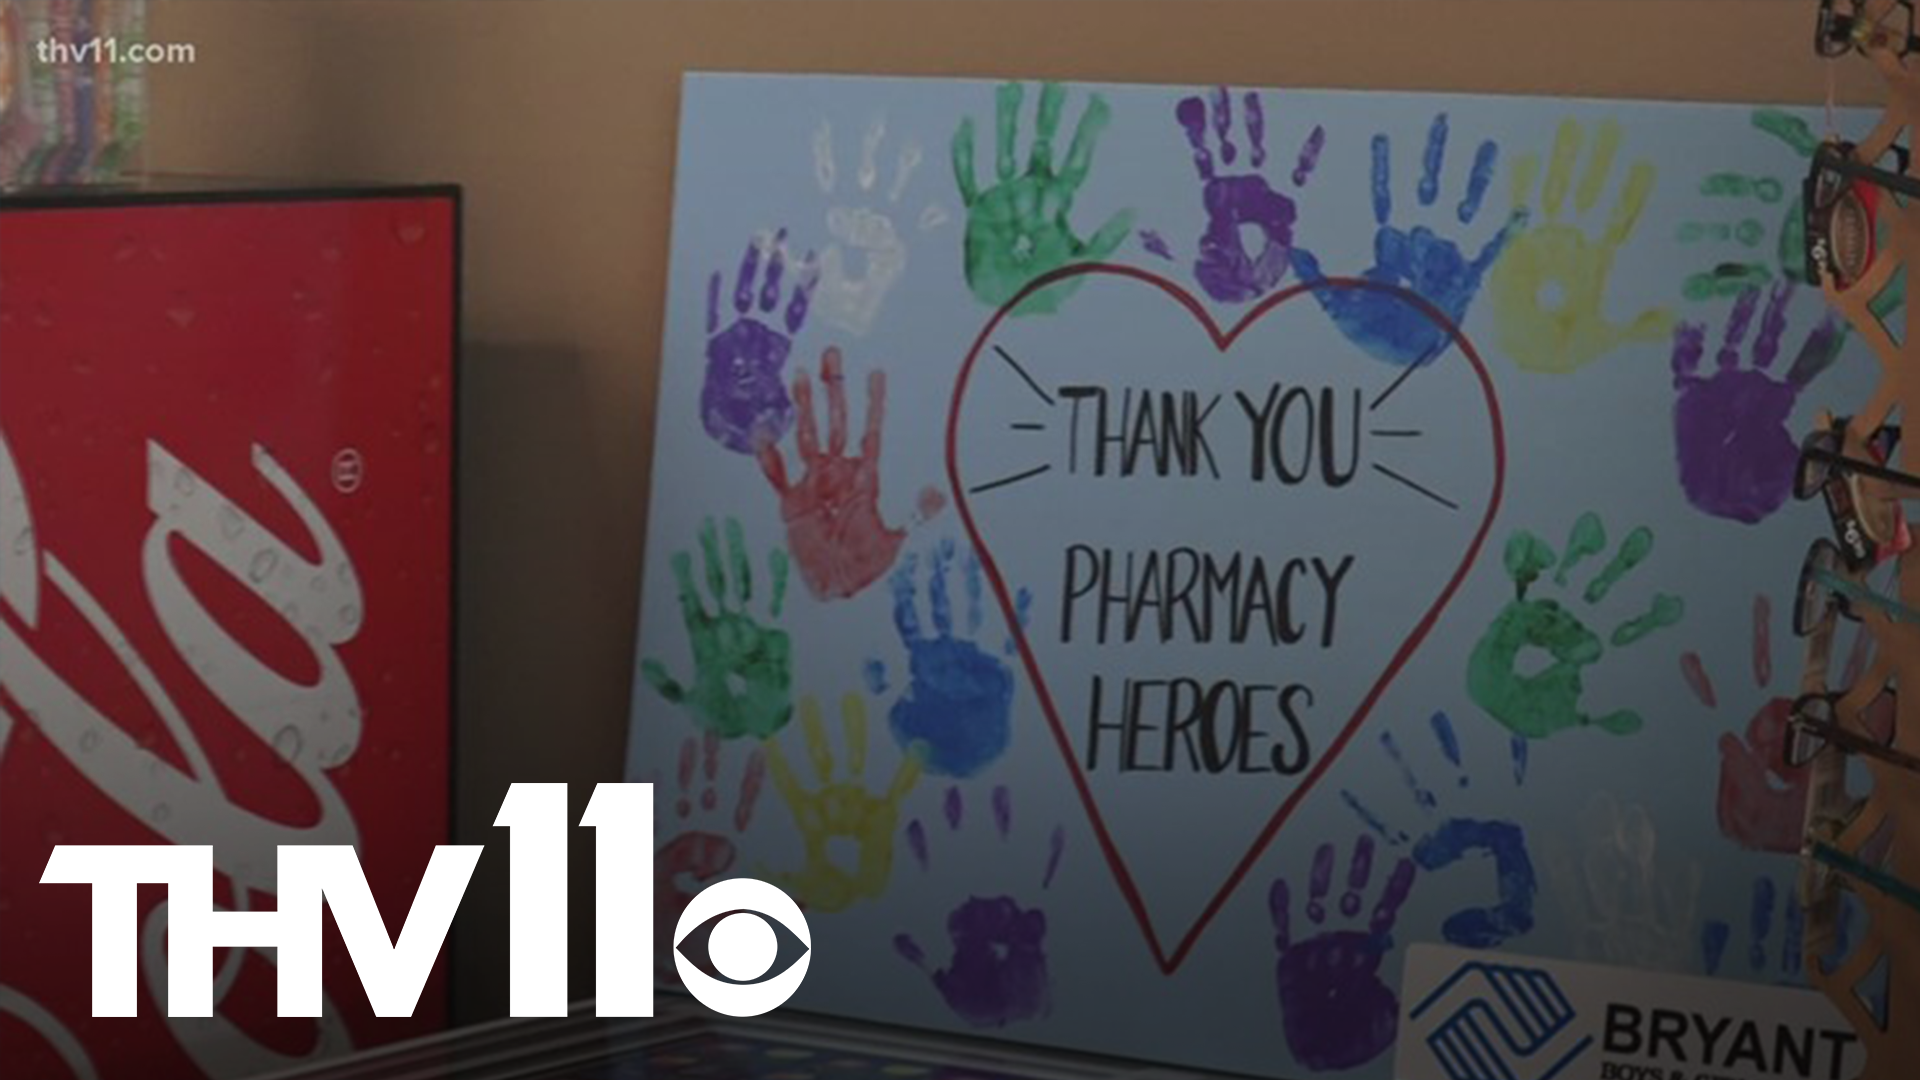 A Bryant pharmacist got emotional when a group of kids made “thank you” signs for him and his staff. His days have been a lot busier during the pandemic.